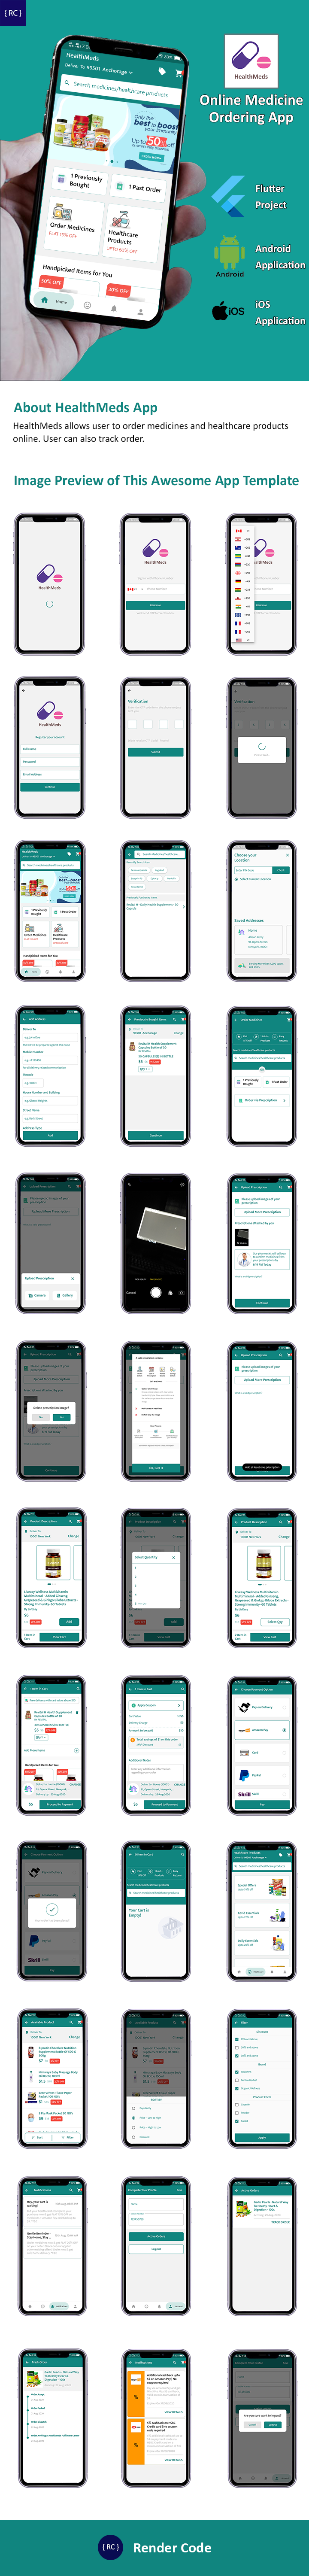 Doctor Appointment Booking Android App Template + iOS App Template | Flutter 3 | 4 Apps | DoctoHub - 11